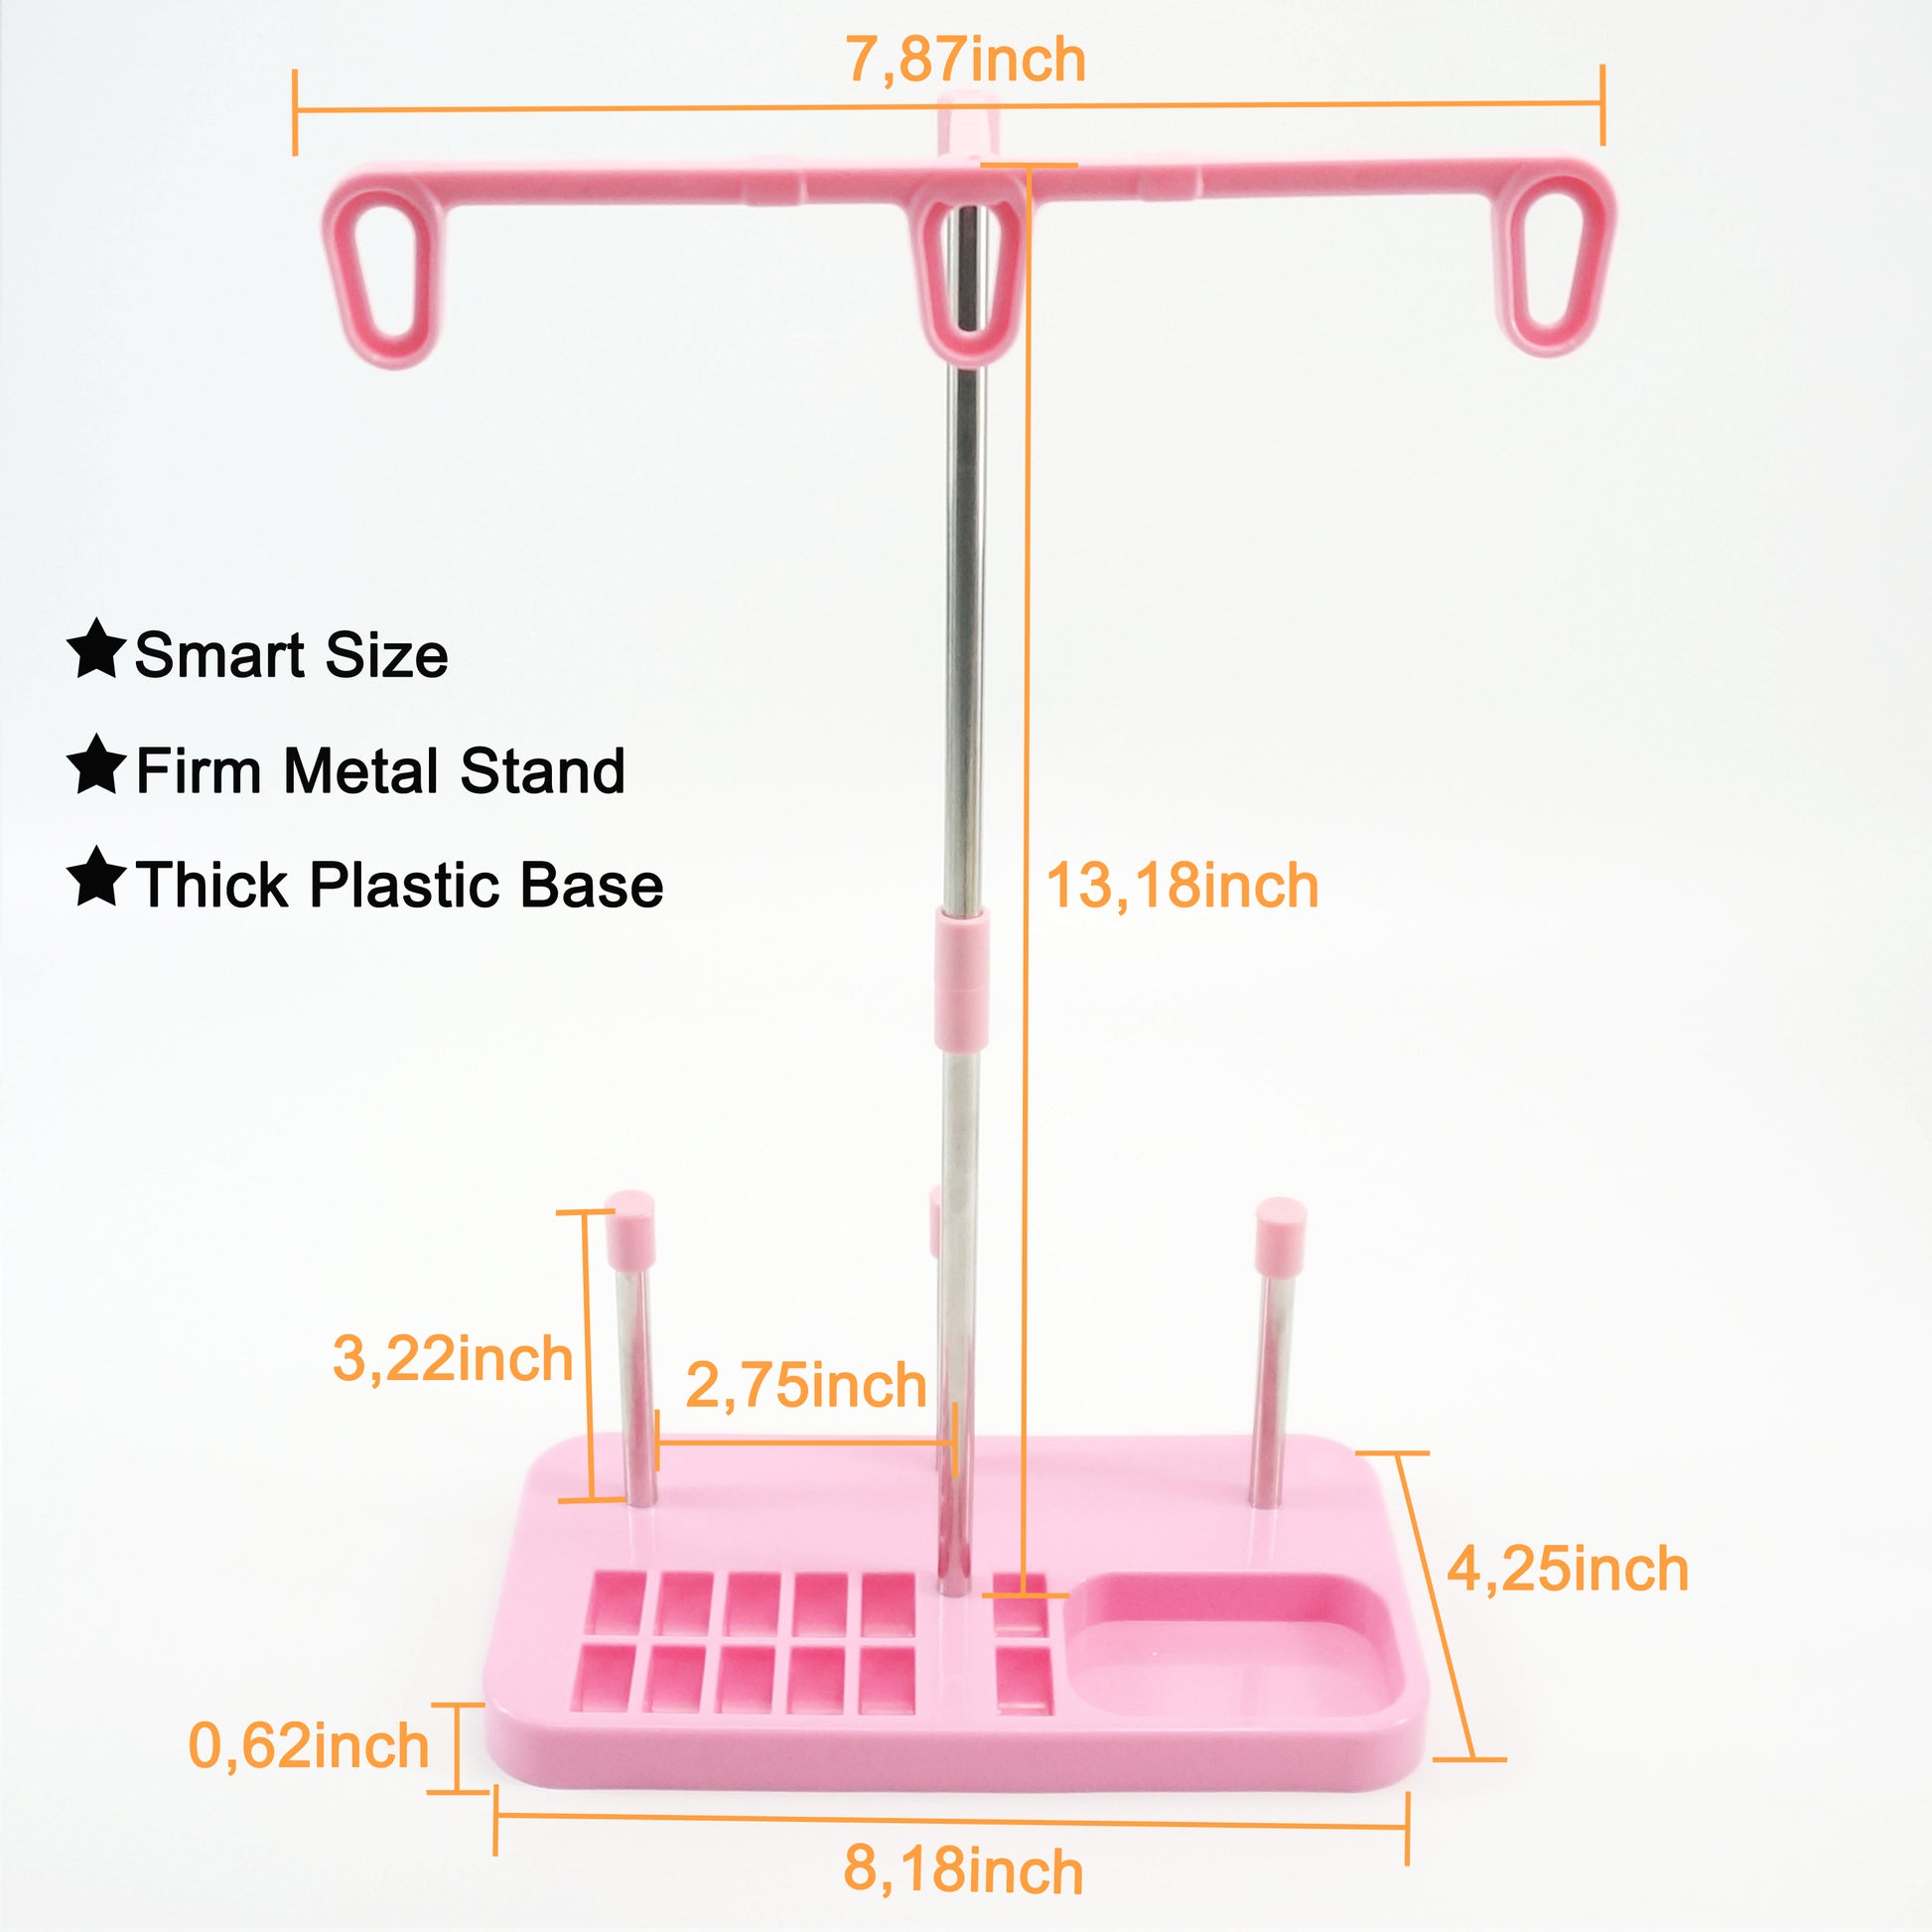 3 Spool Thread Stand Holder in Pink or Blue from ThreadNanny